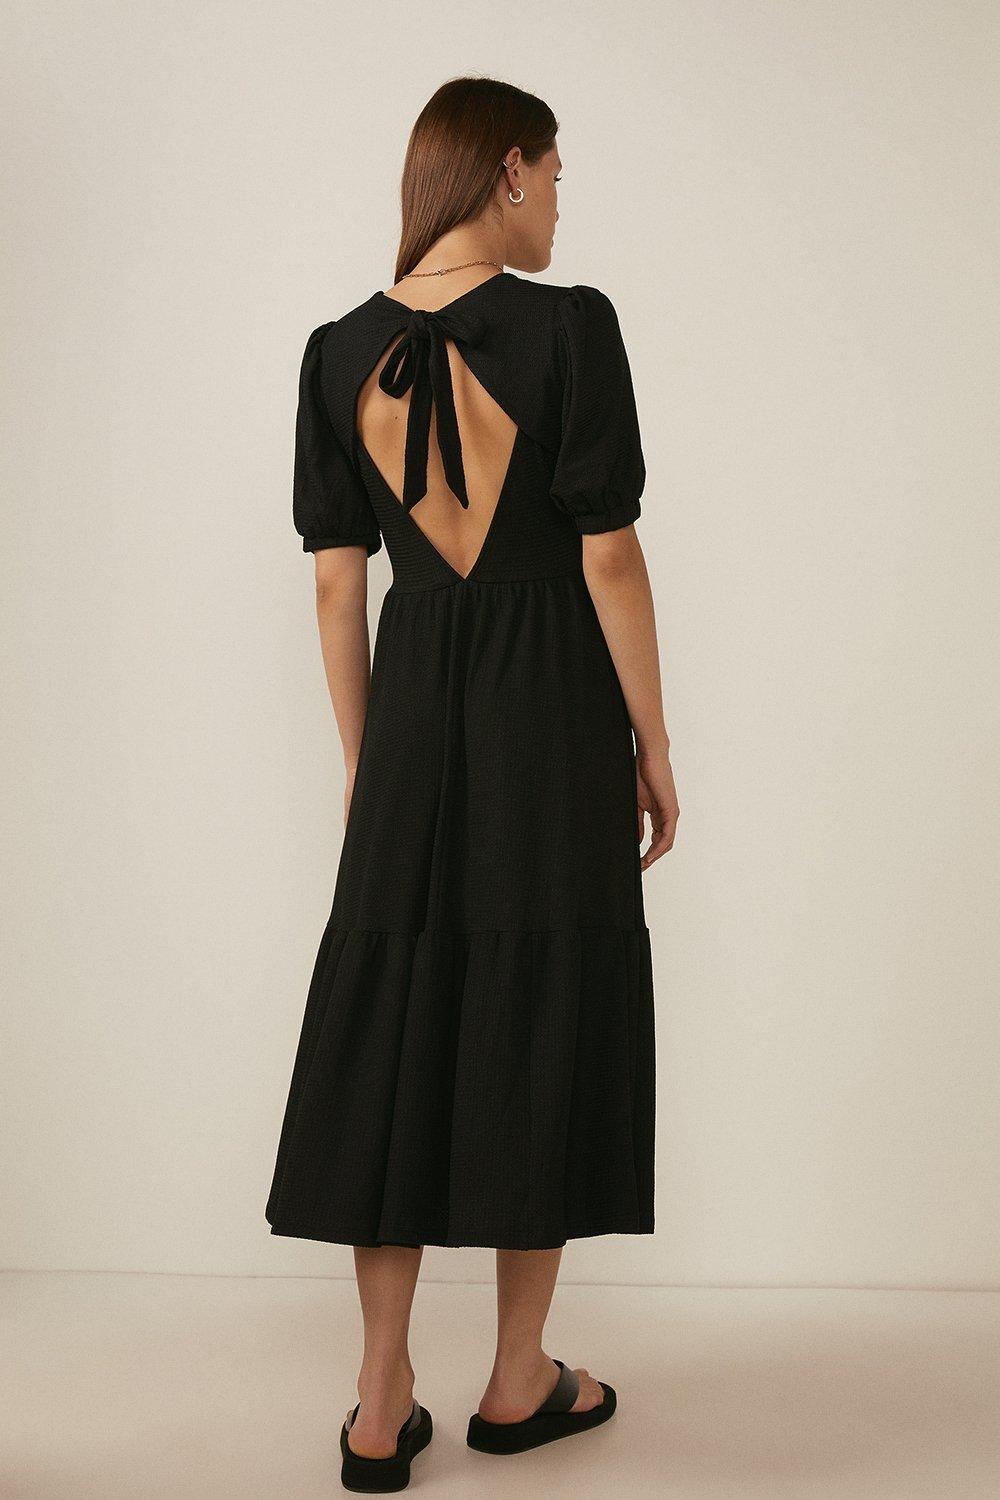 Textured Jersey Cut Out Back Midi Dress ...